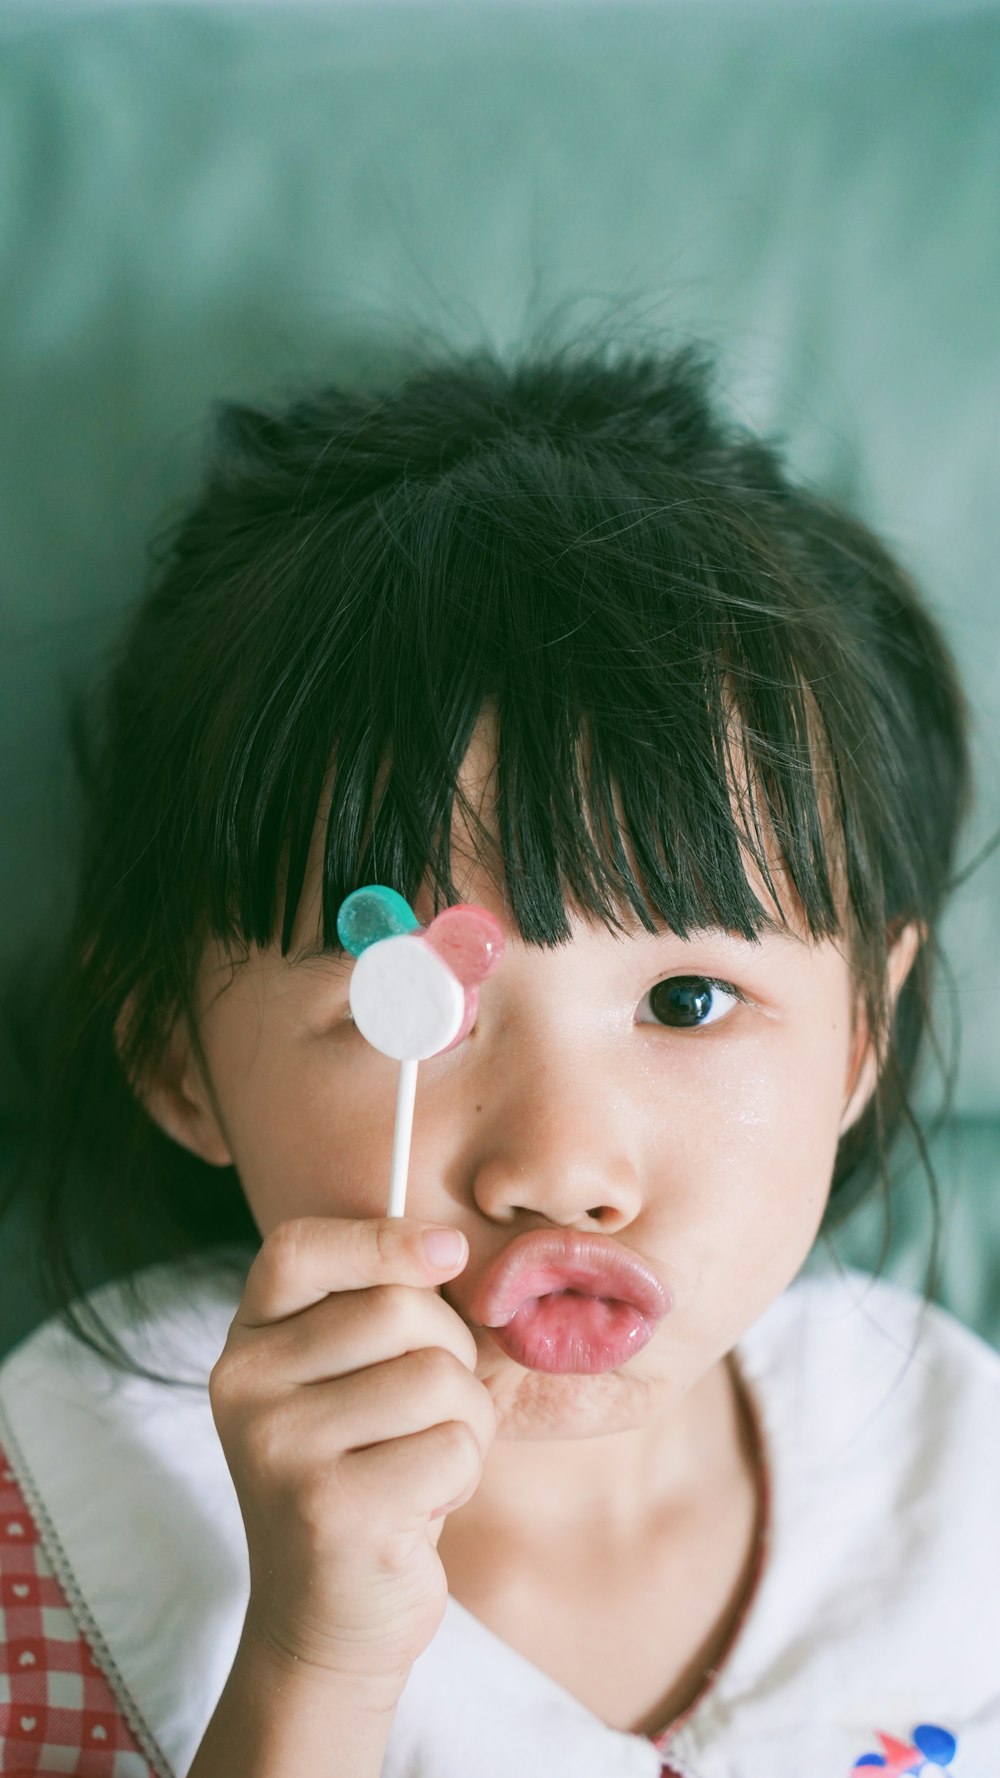 a little girl holding a lollipop in her mouth